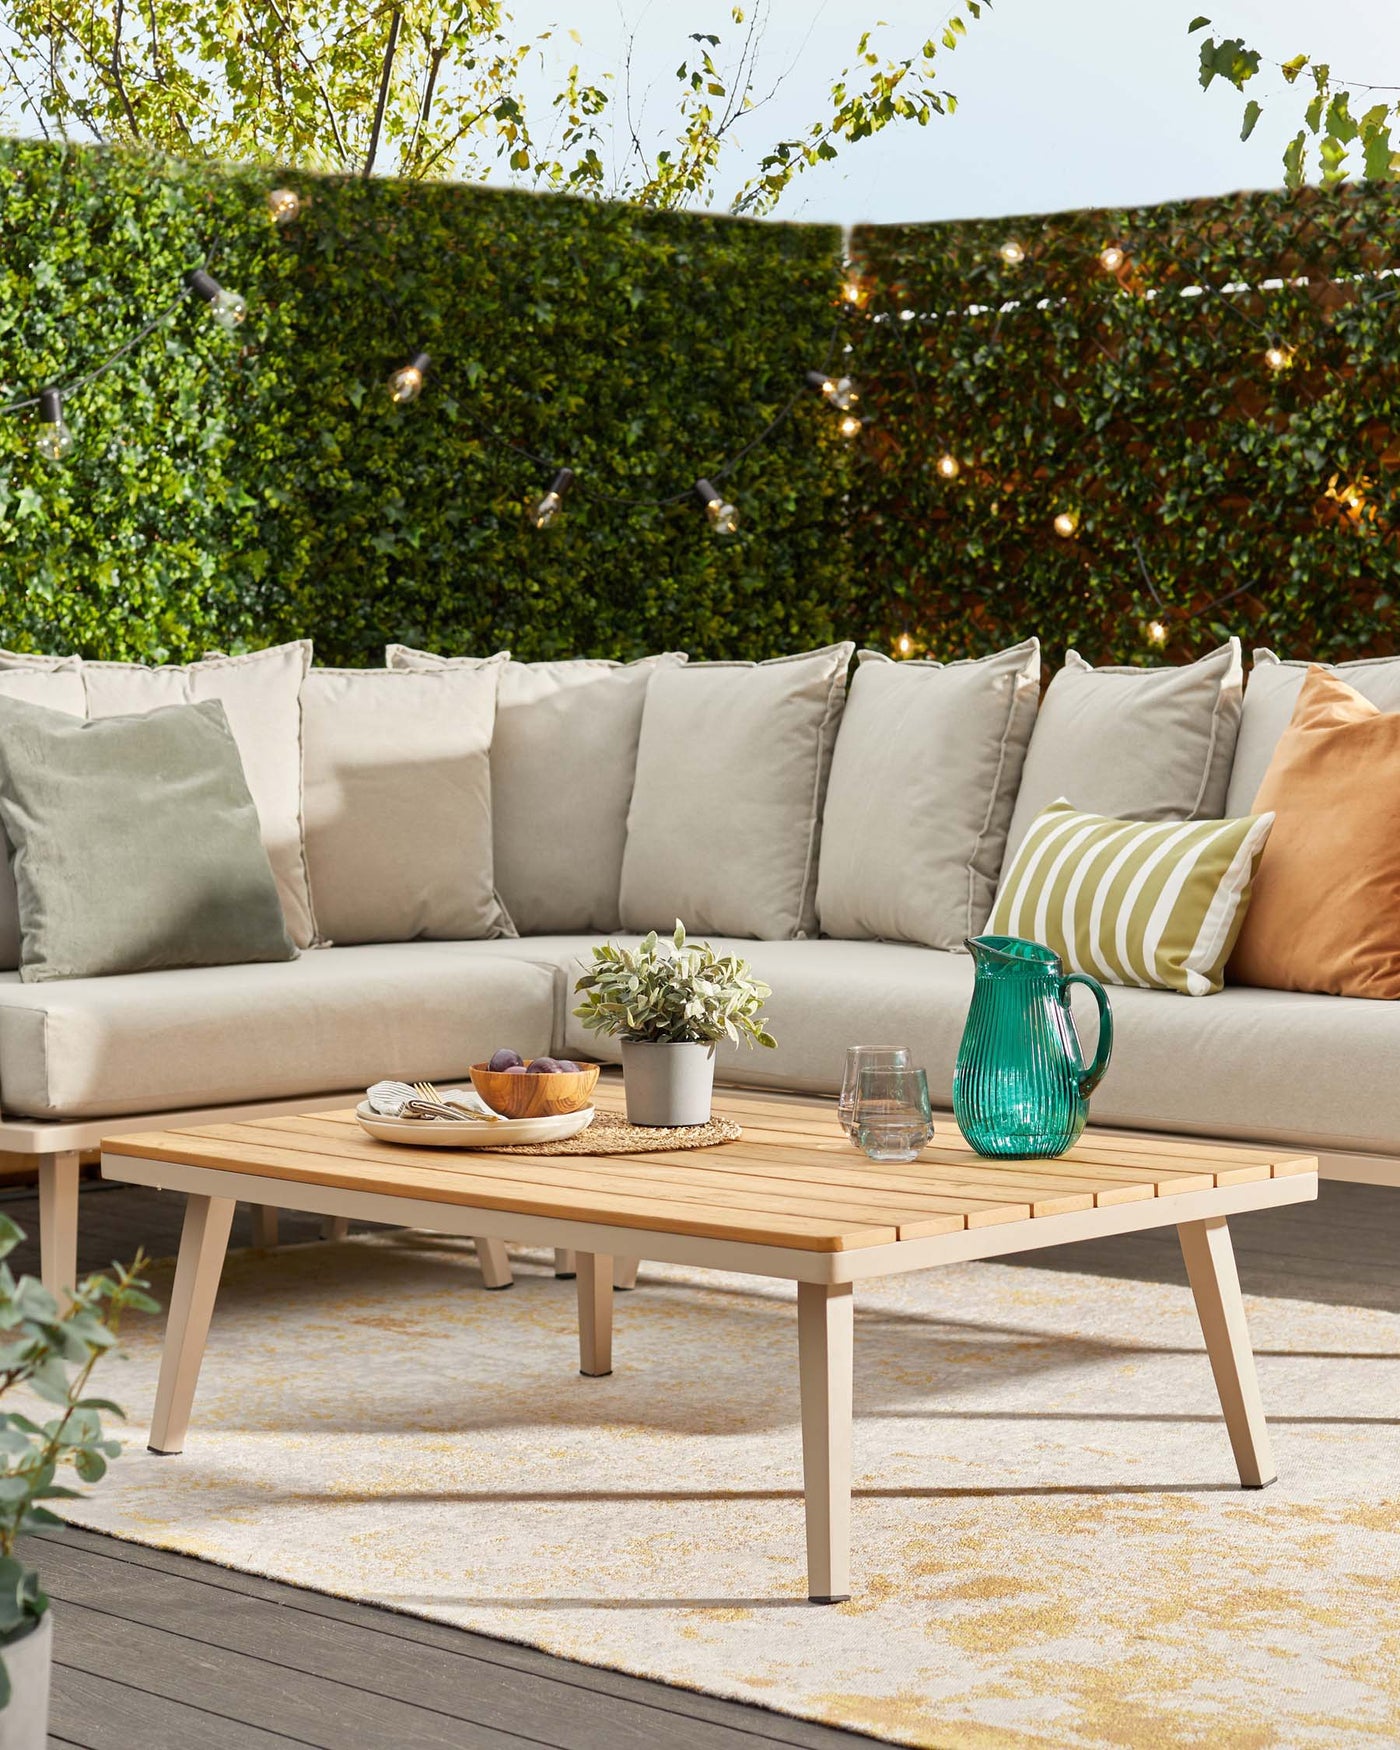 Outdoor lounge setting featuring a large beige modular sofa with plush cushions and a rectangular wooden coffee table with a slatted surface design.